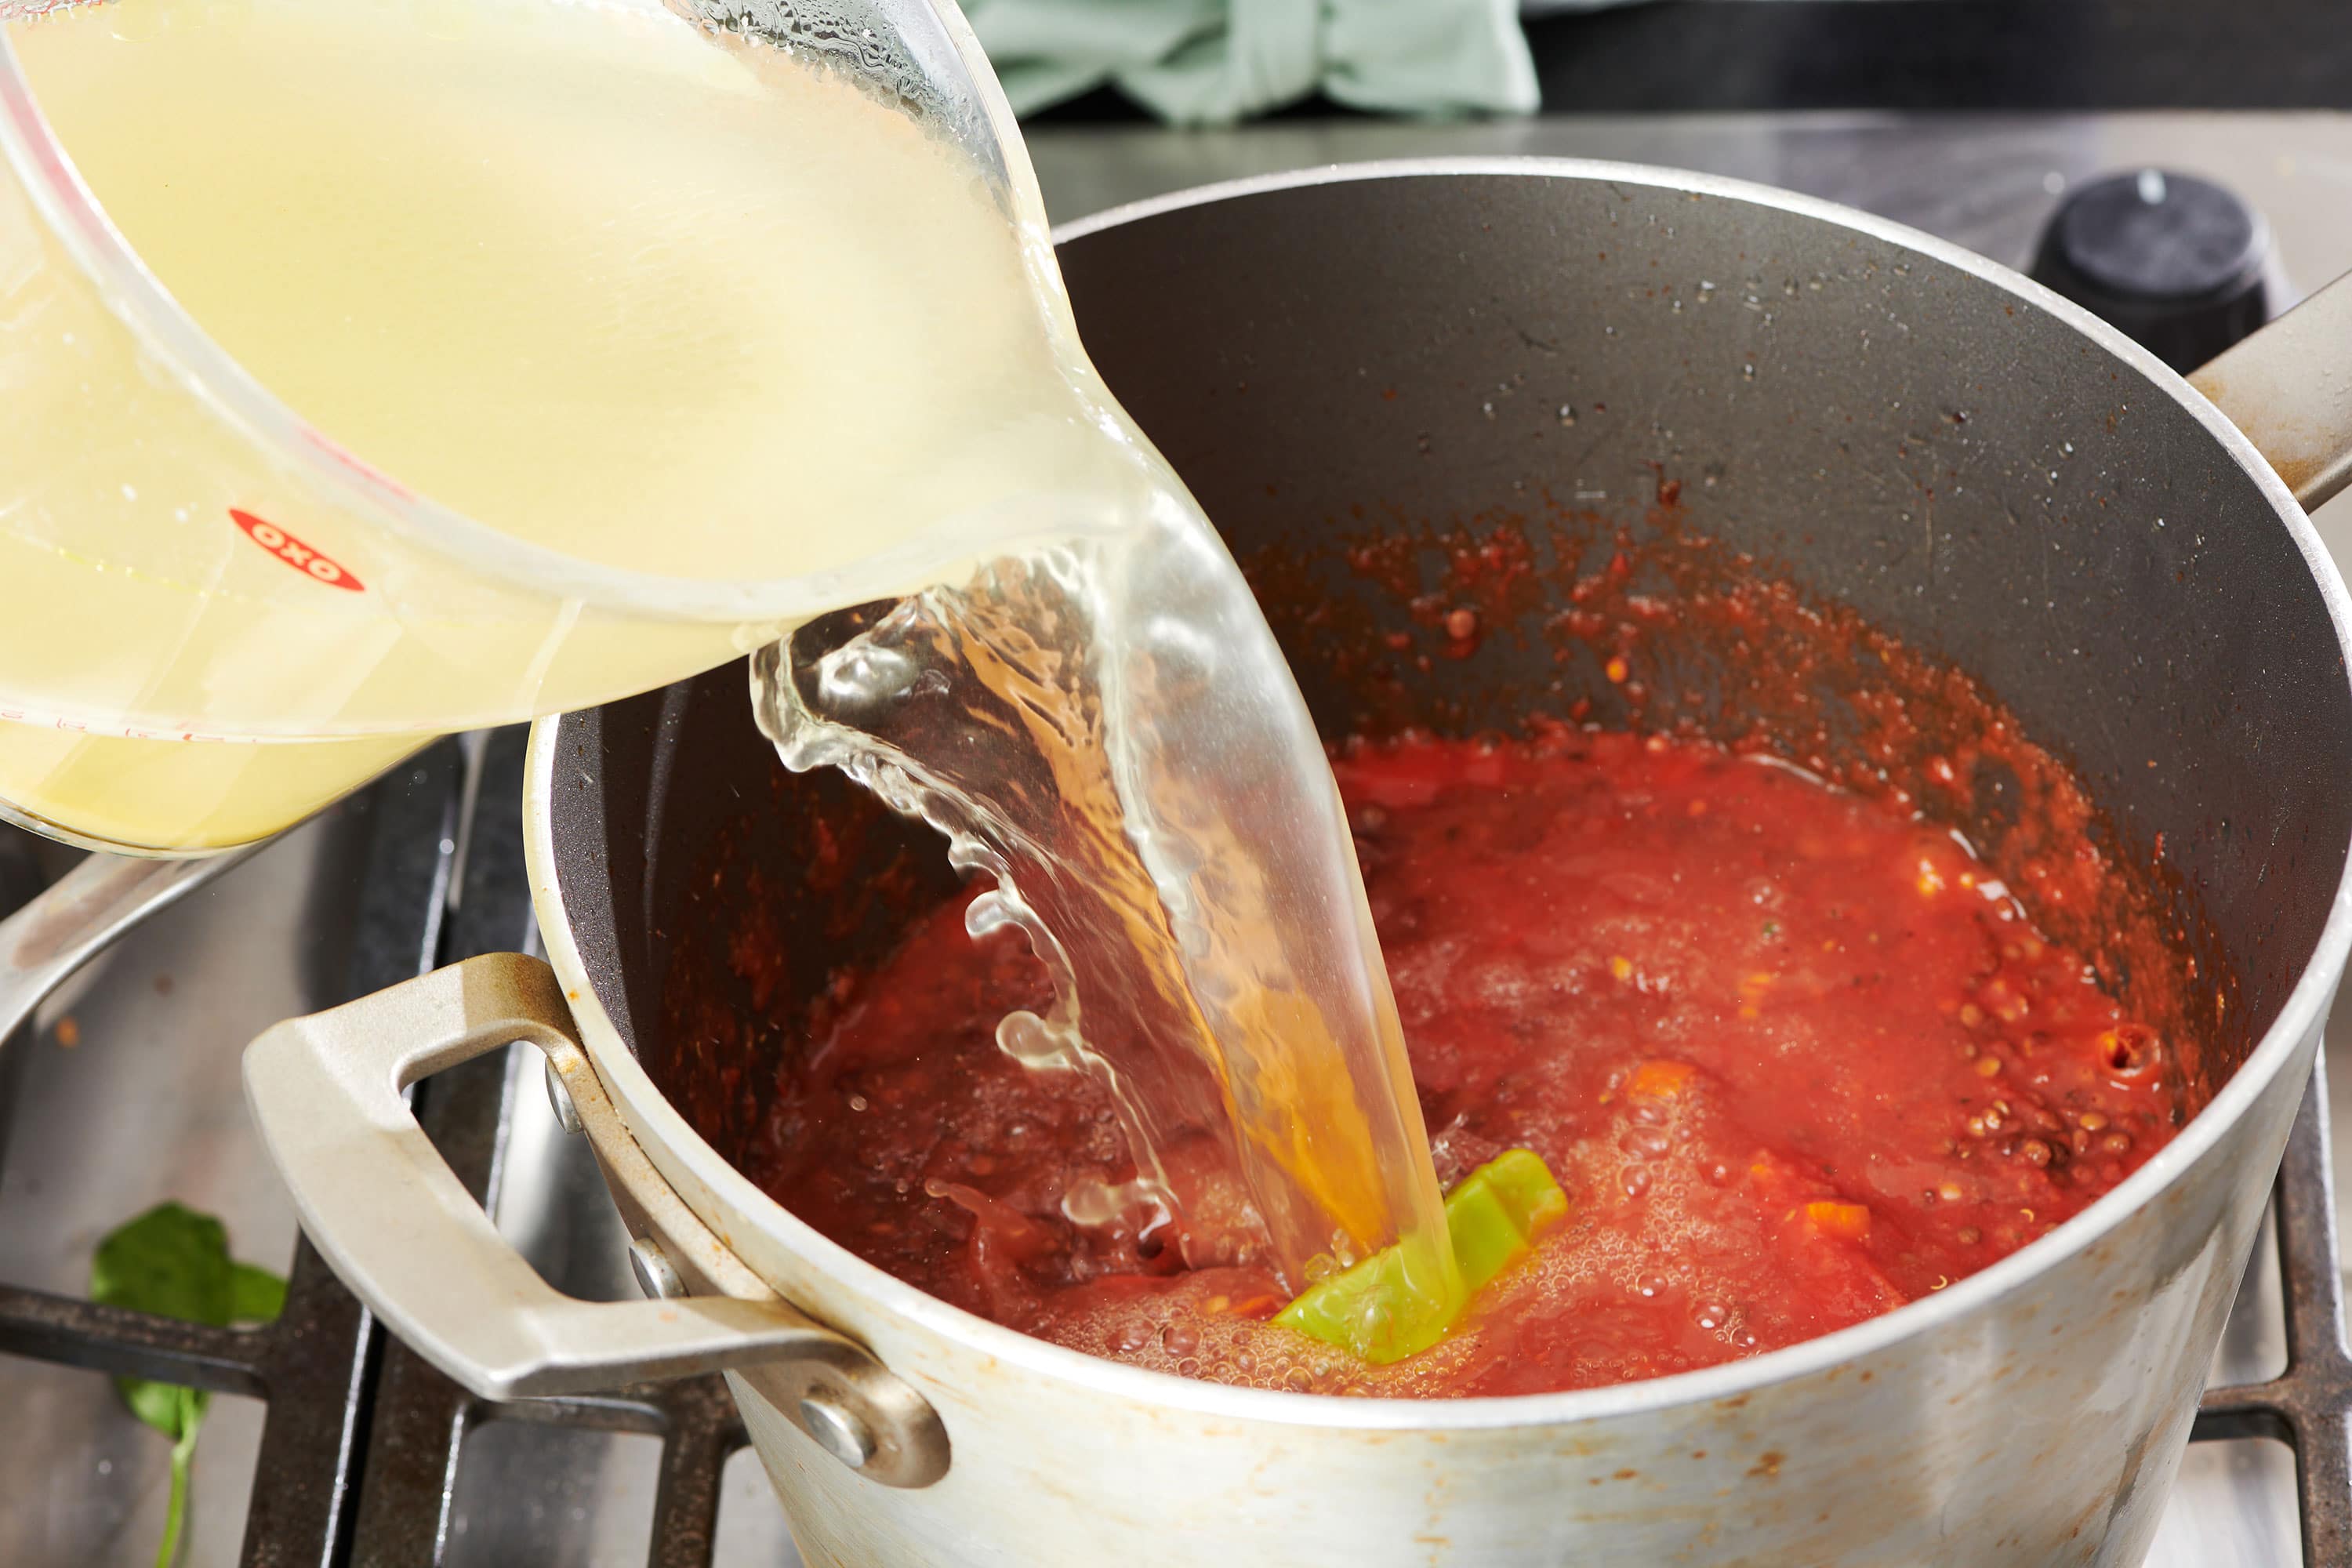 Chicken broth pouring into a pan with crushed tomatoes and vegetables.